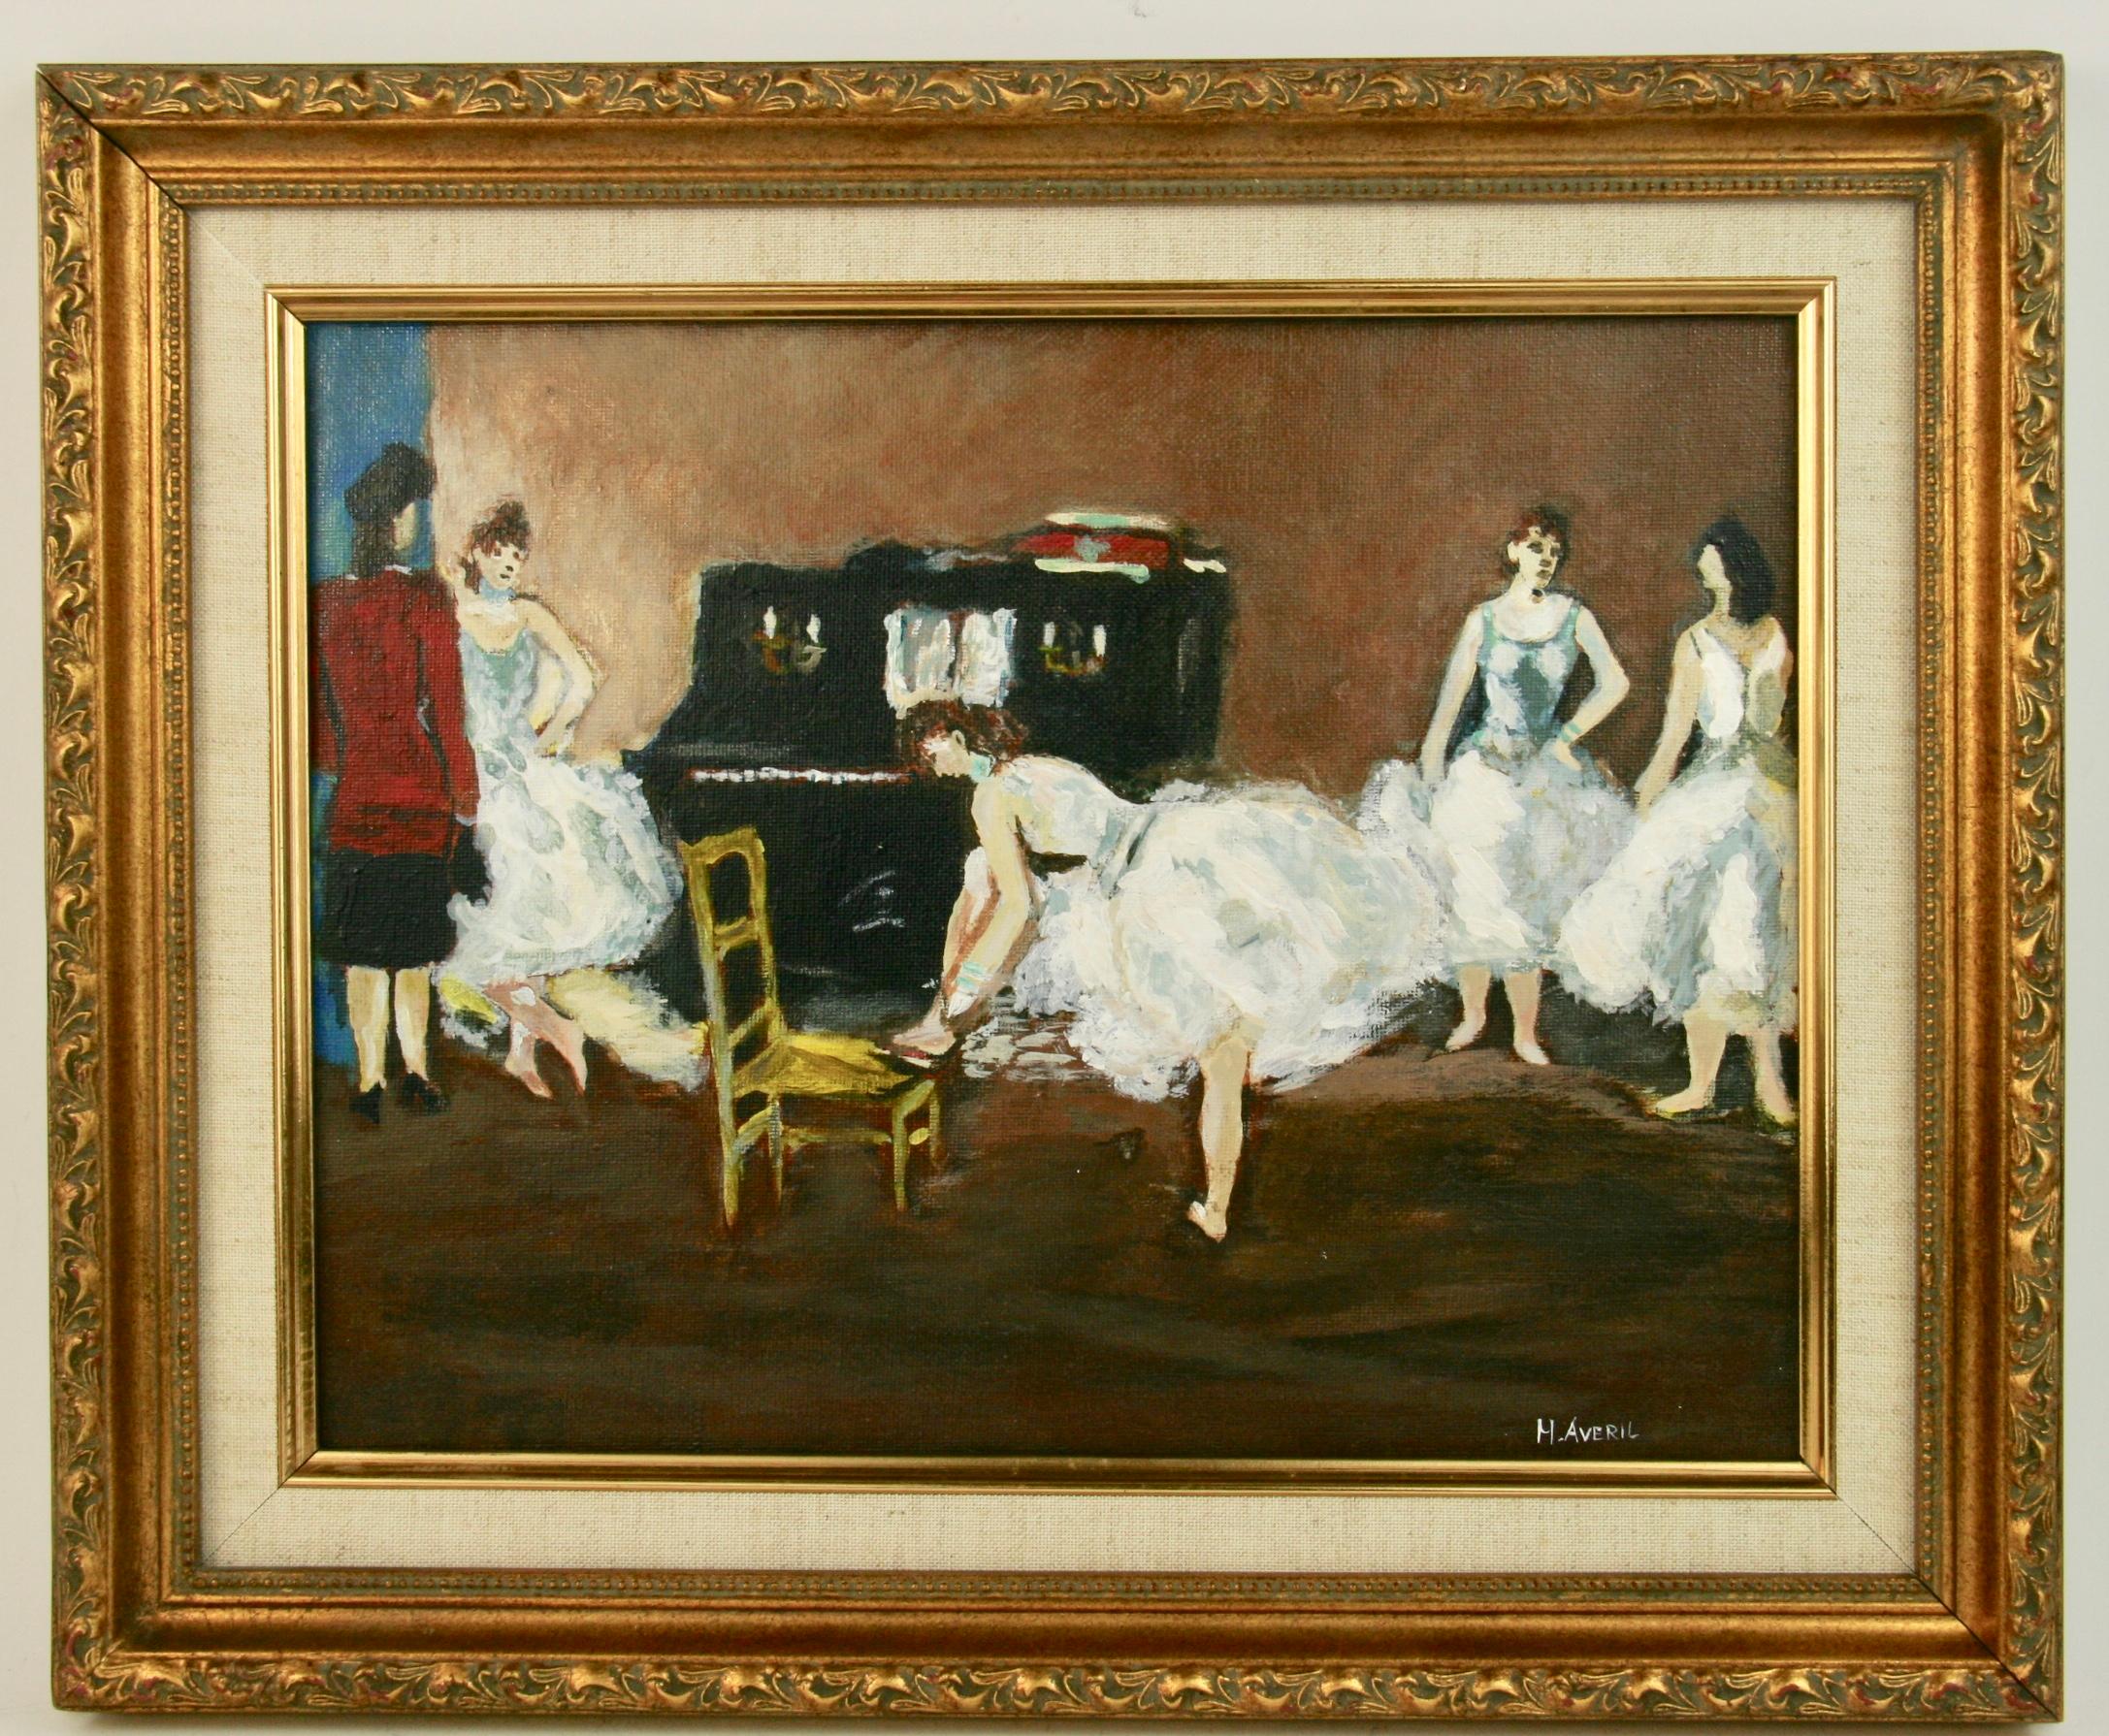 M.Averil Figurative Painting - Antique Impressionist Female Figural Painting Back Stage At The Theater 